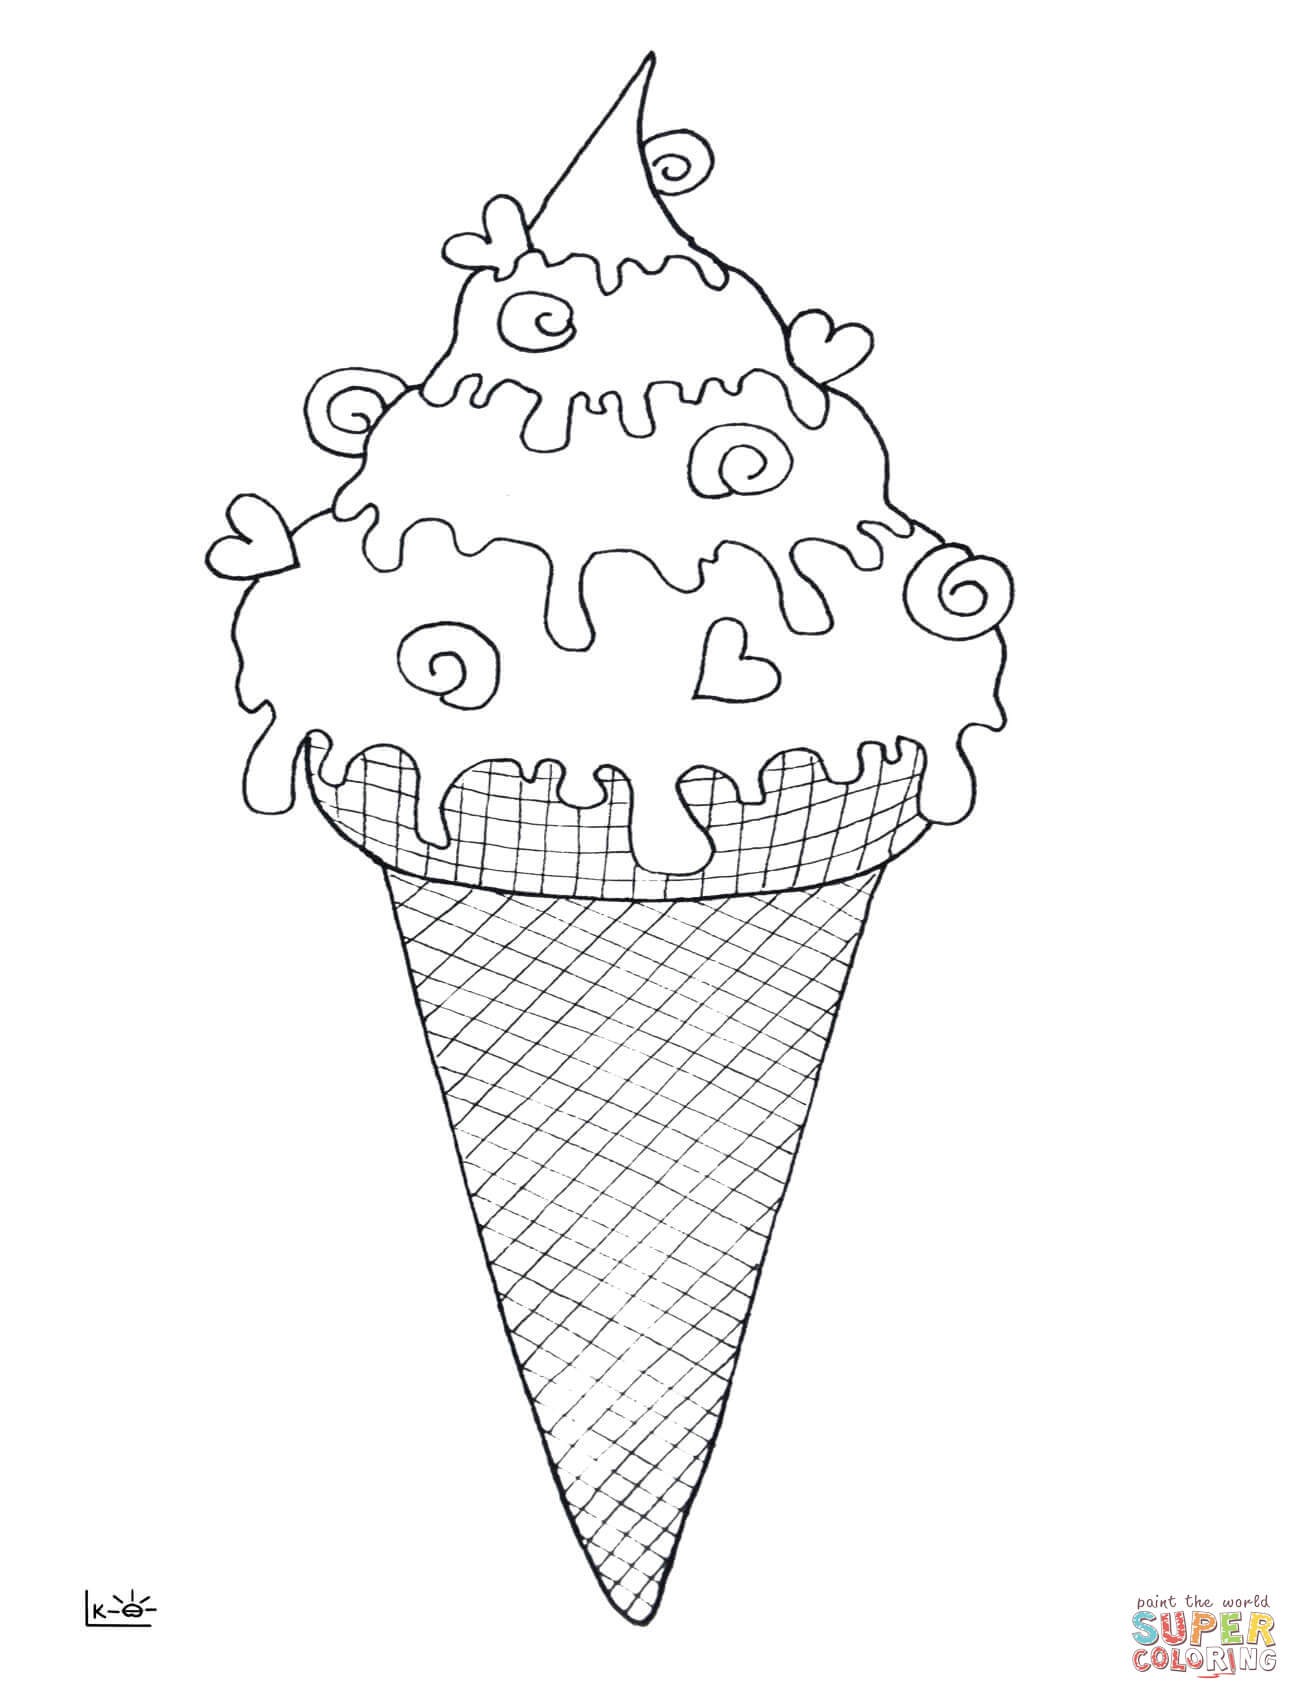 Ice Cream Cone Coloring Page at GetColorings.com | Free printable